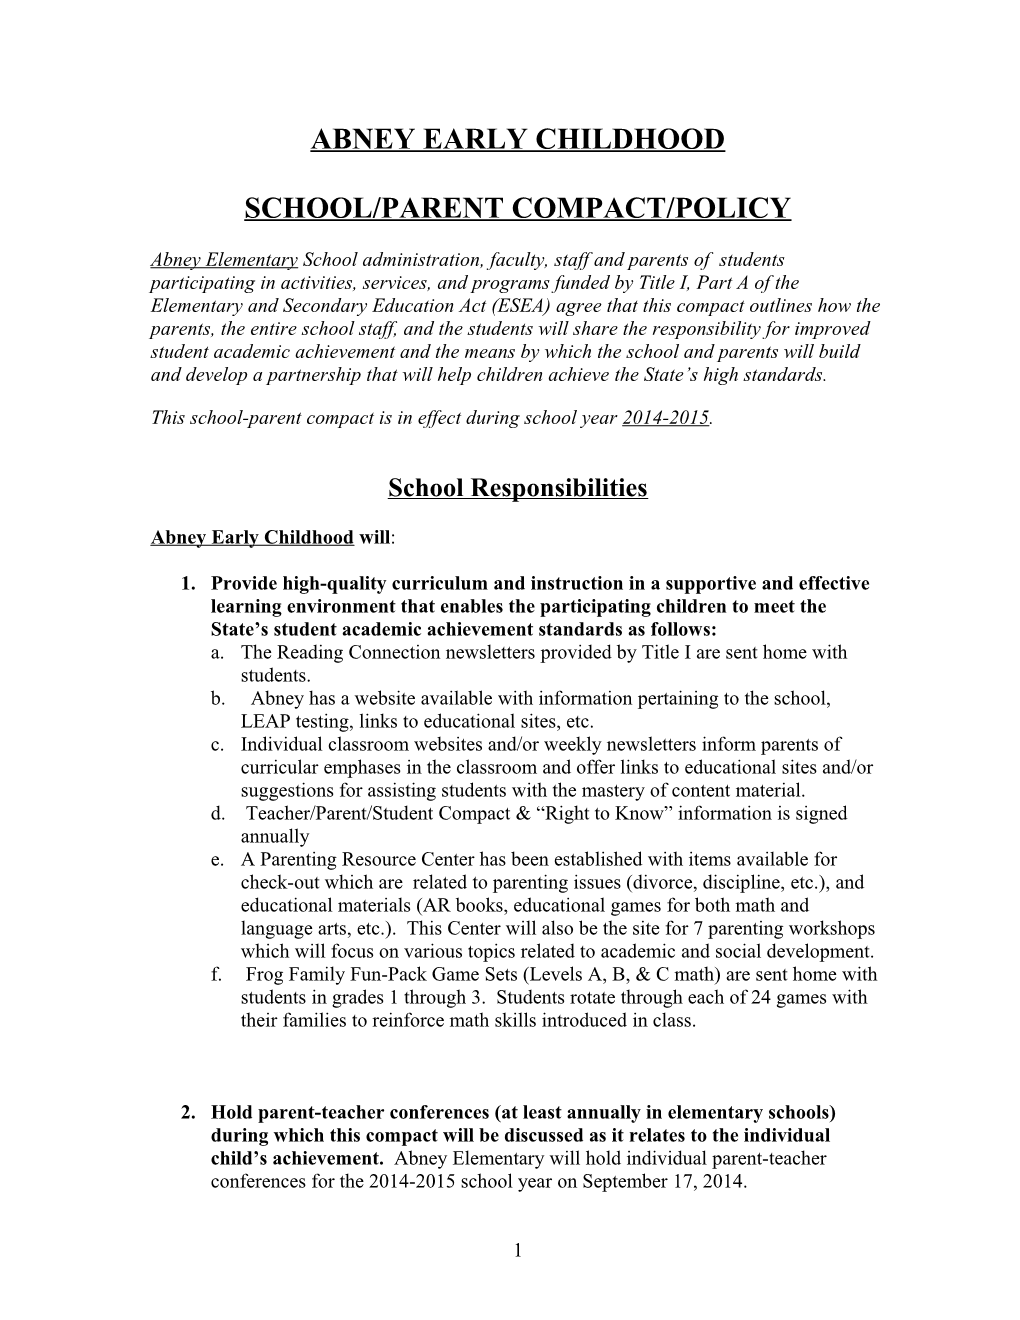 School/Parent Compact/Policy